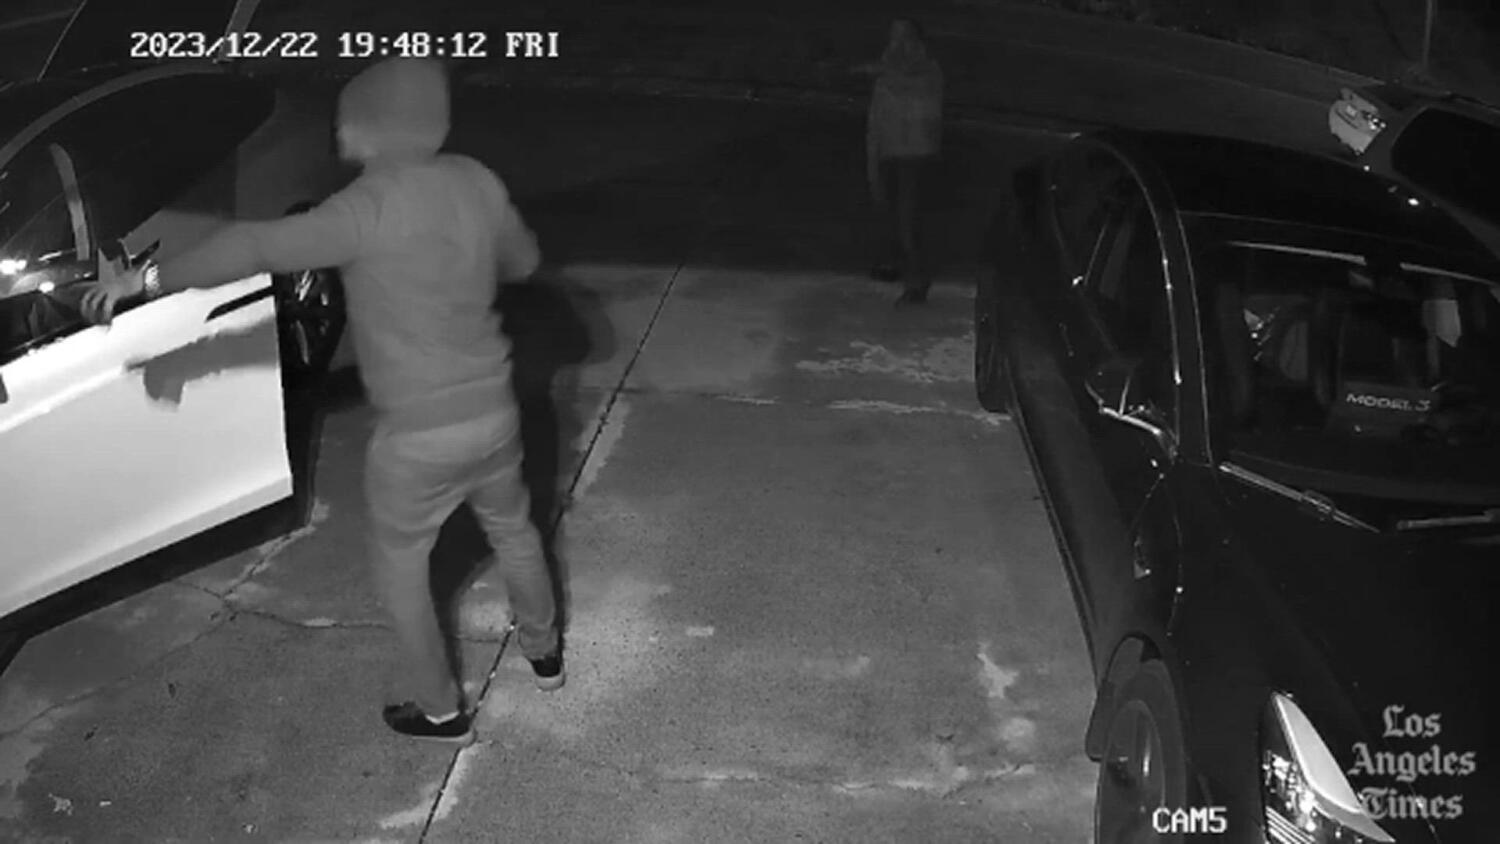 '45 seconds of horror': Fullerton couple assaulted, heirlooms stolen in follow-home robbery 